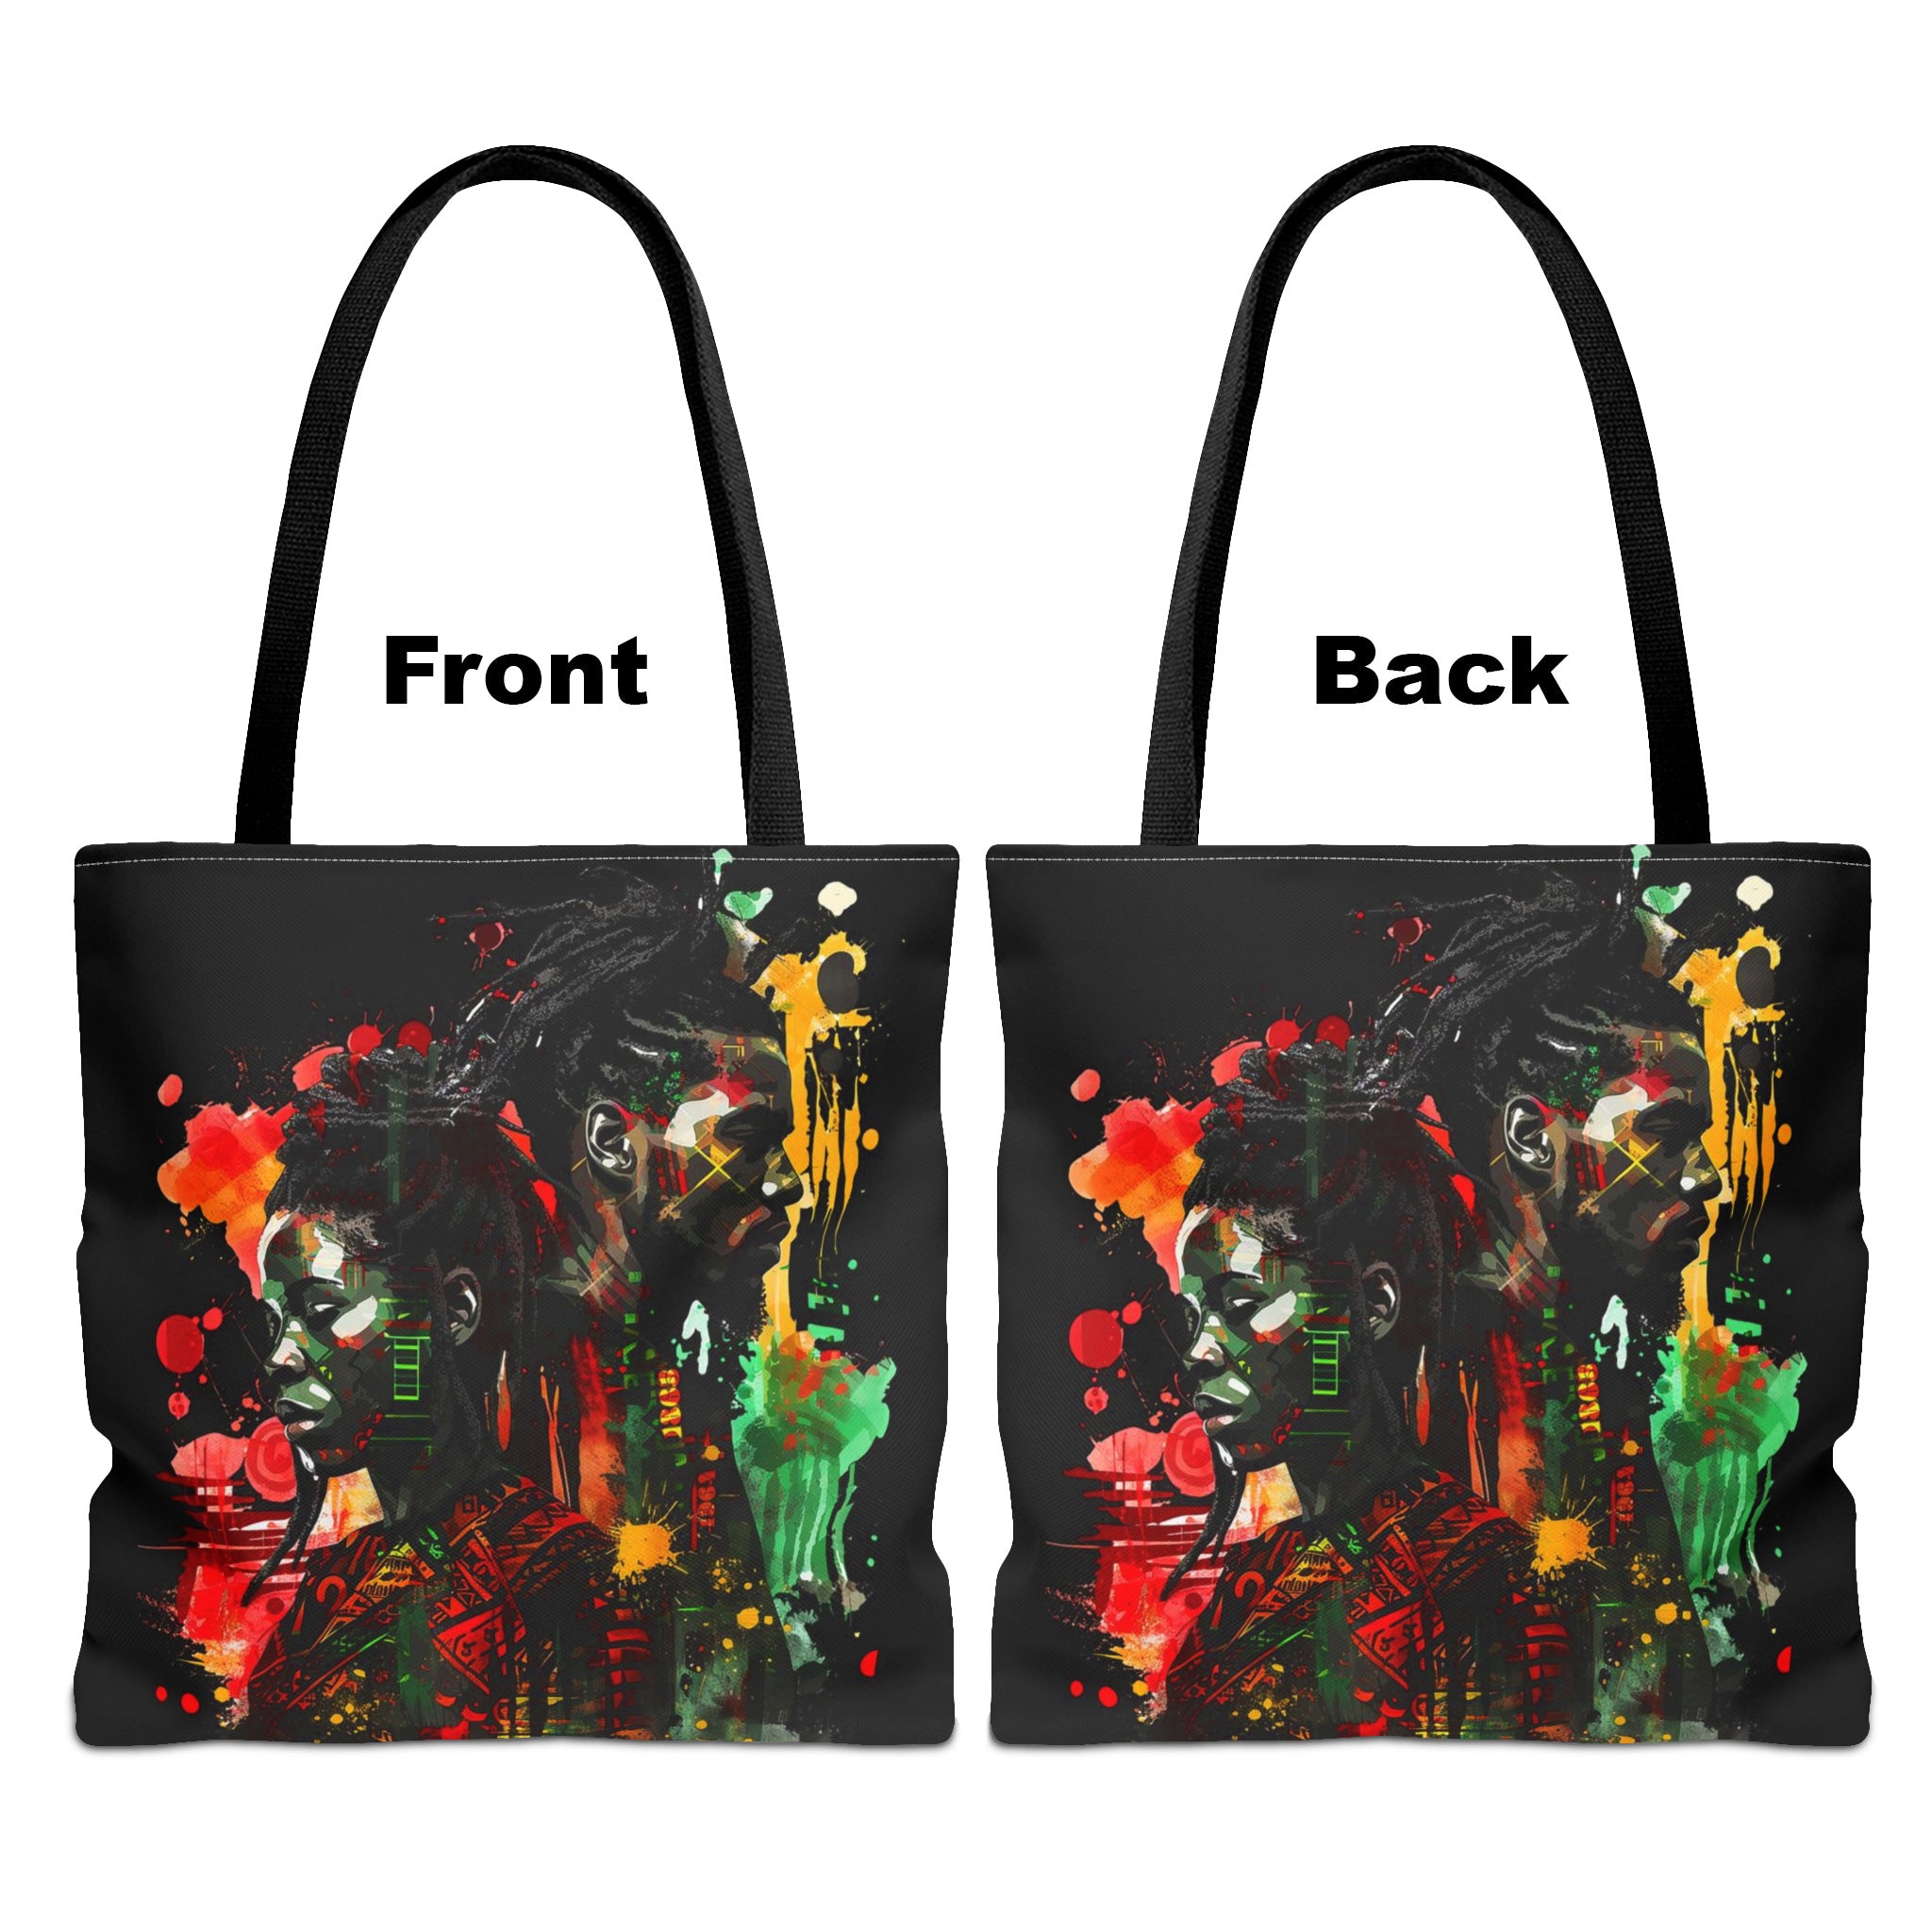 Front and back views of Juneteenth Tote bag.